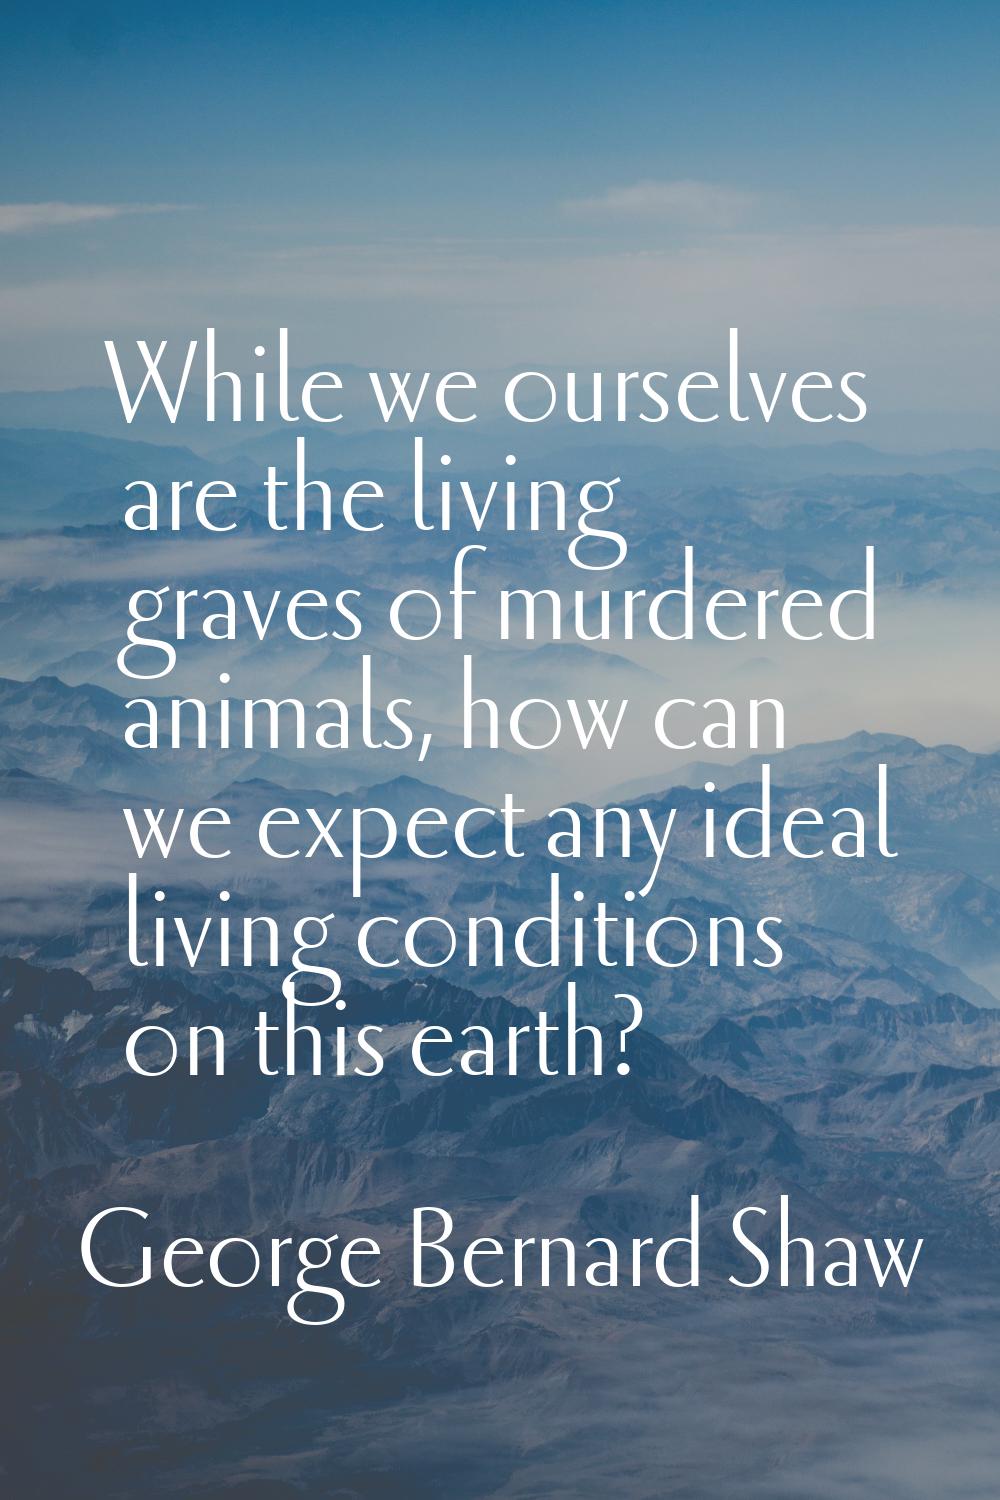 While we ourselves are the living graves of murdered animals, how can we expect any ideal living co